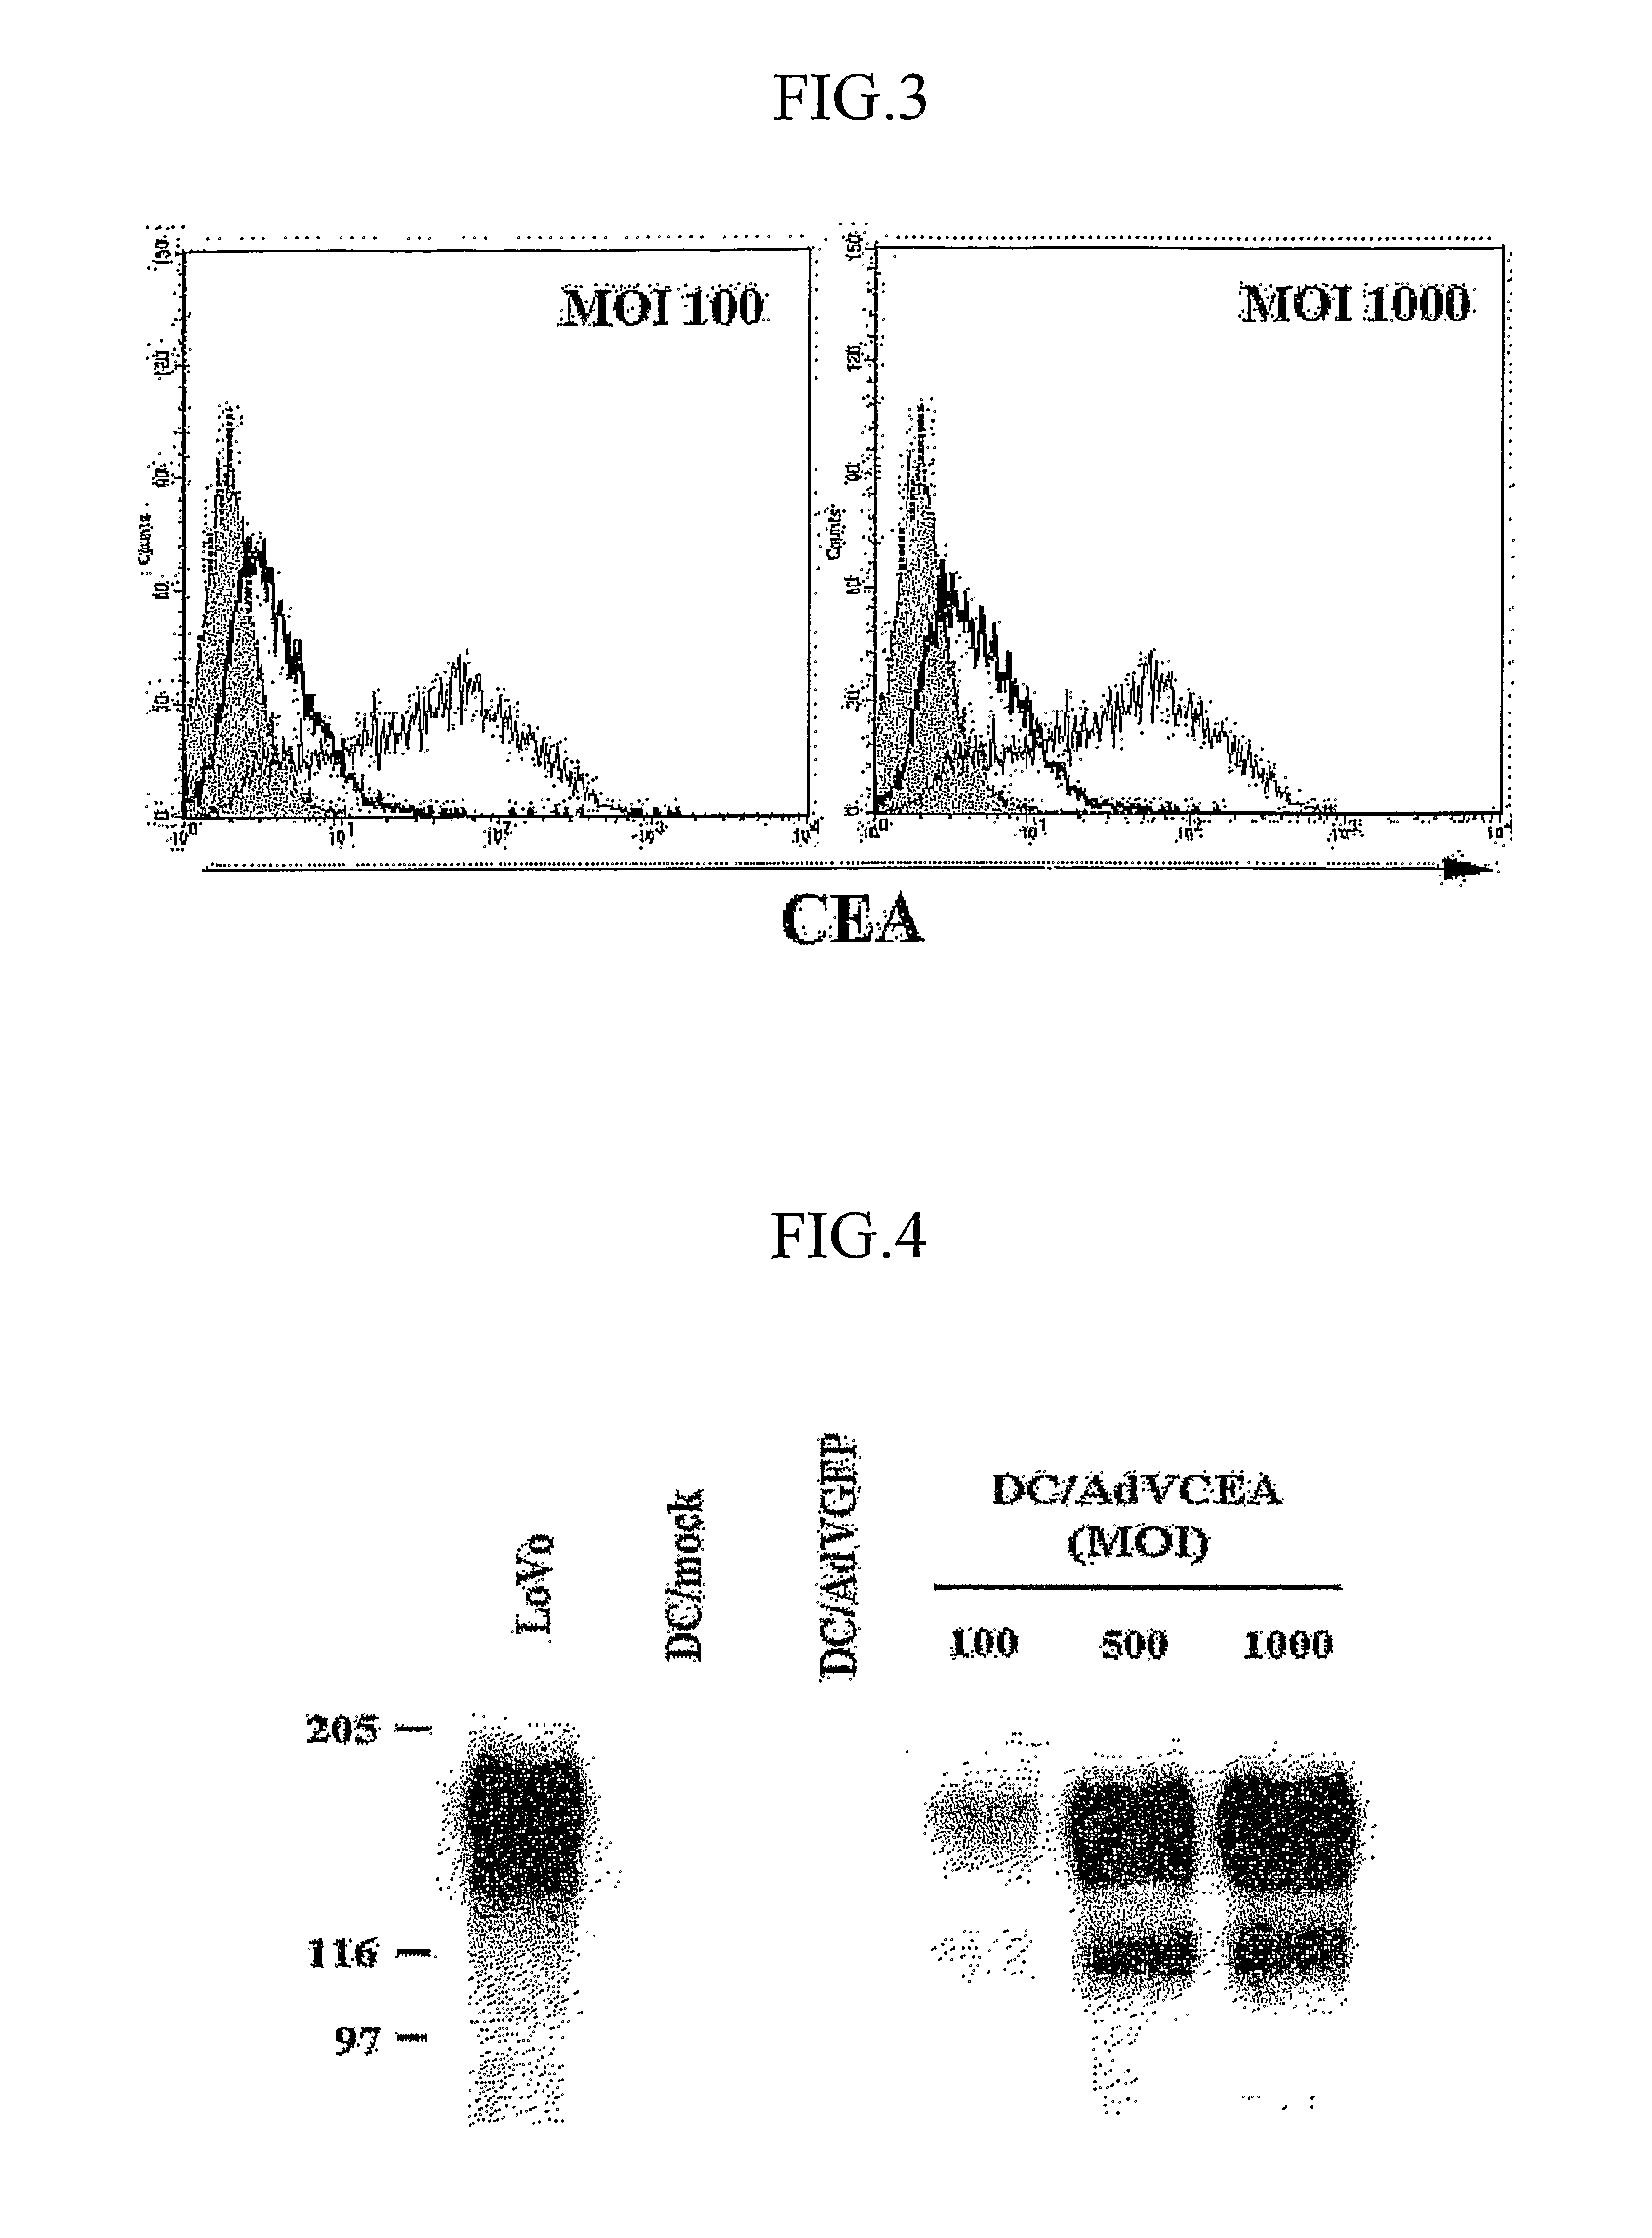 Dendrite cells transduced with recombinant adenovirus AdVCEA which generate CEA-specific cytotoxic T lymphocytes, vaccine and pharmaceutical composition comprising the same